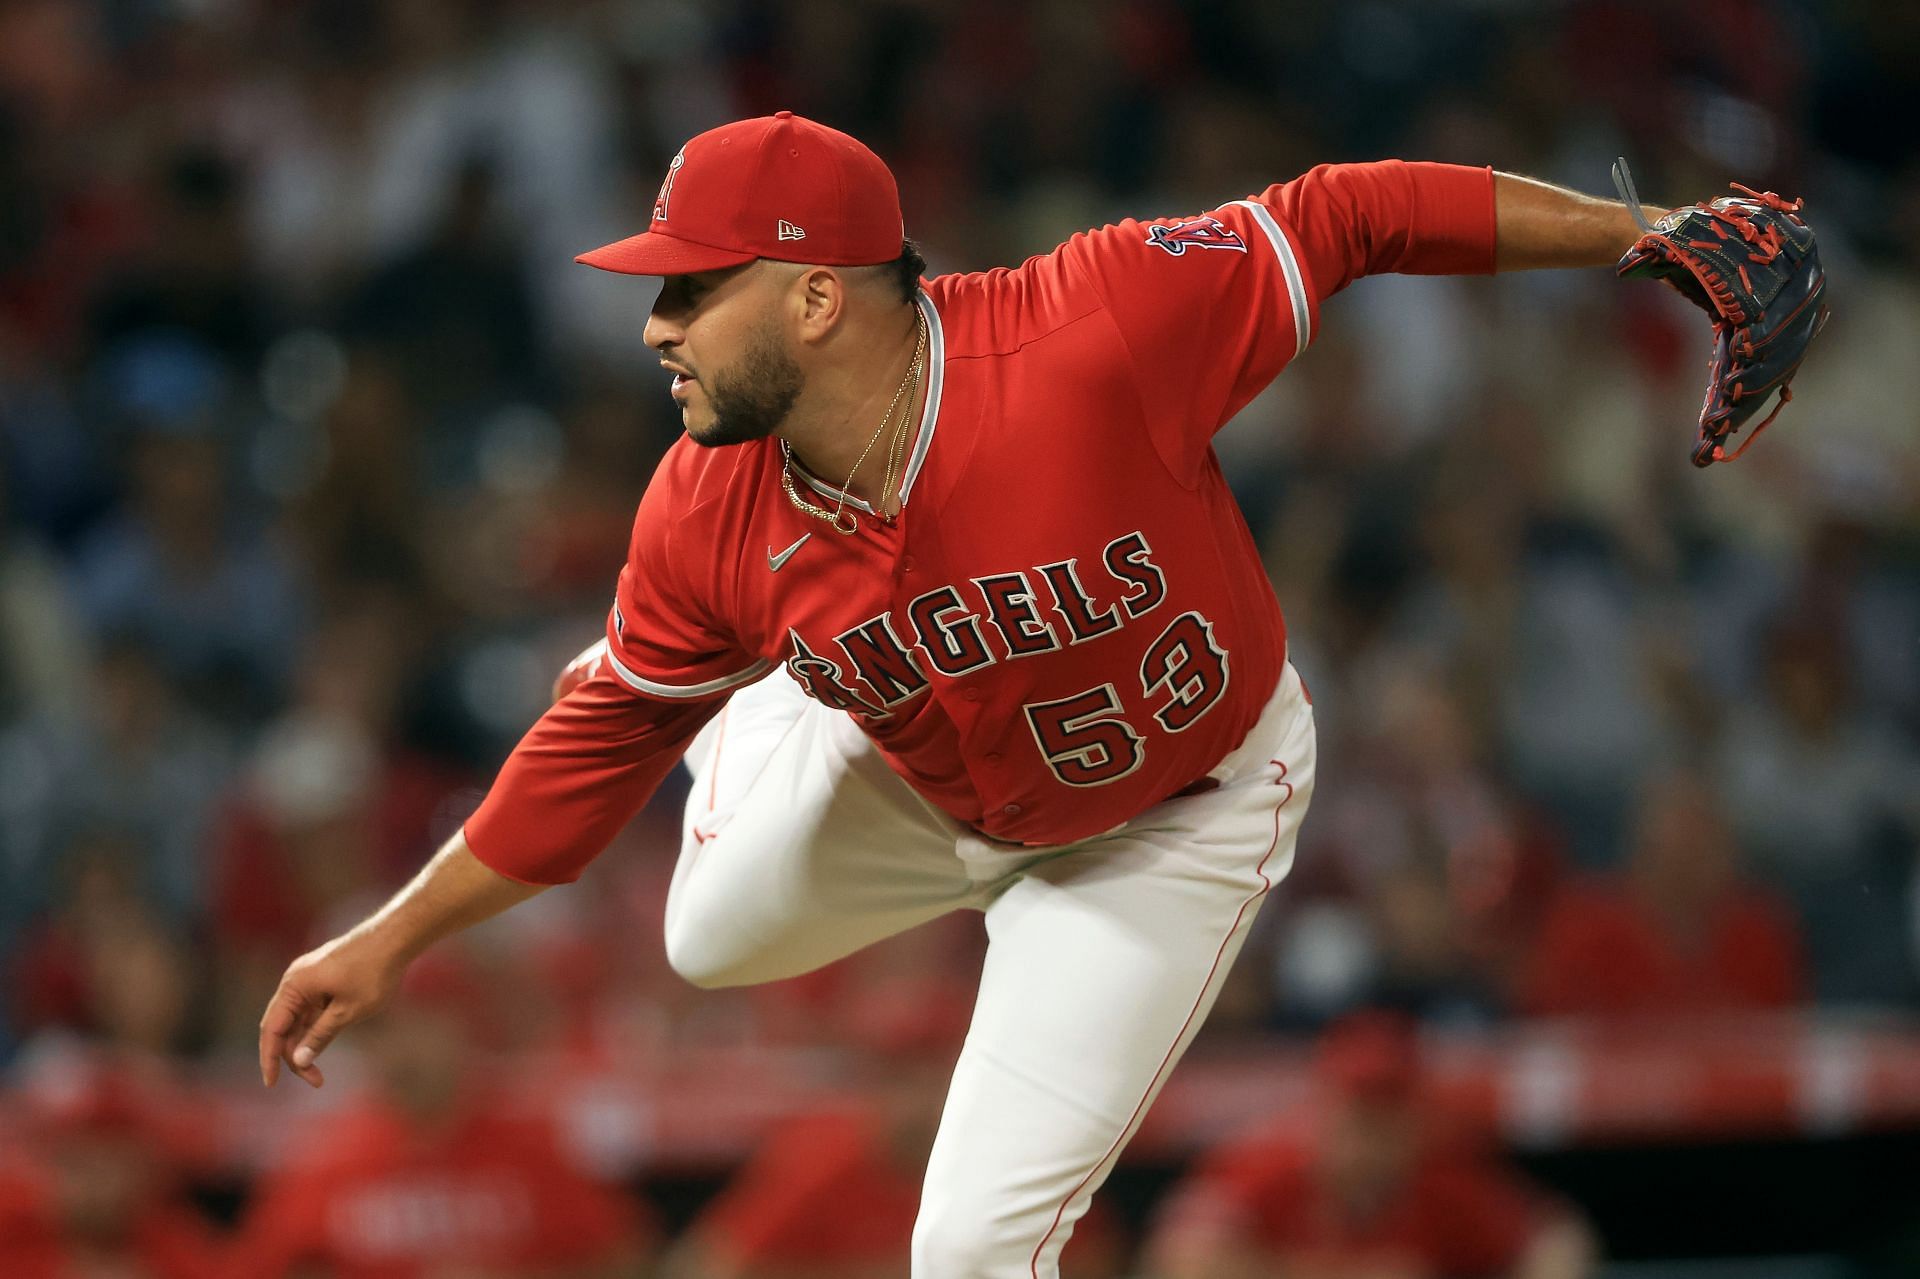 Carlos Estevez #53 of the Los Angeles Angels pitches during a game against the New York Yankees at Angel Stadium of Anaheim on July 18, 2023 in Anaheim, California. (Photo by Sean M. Haffey/Getty Images)